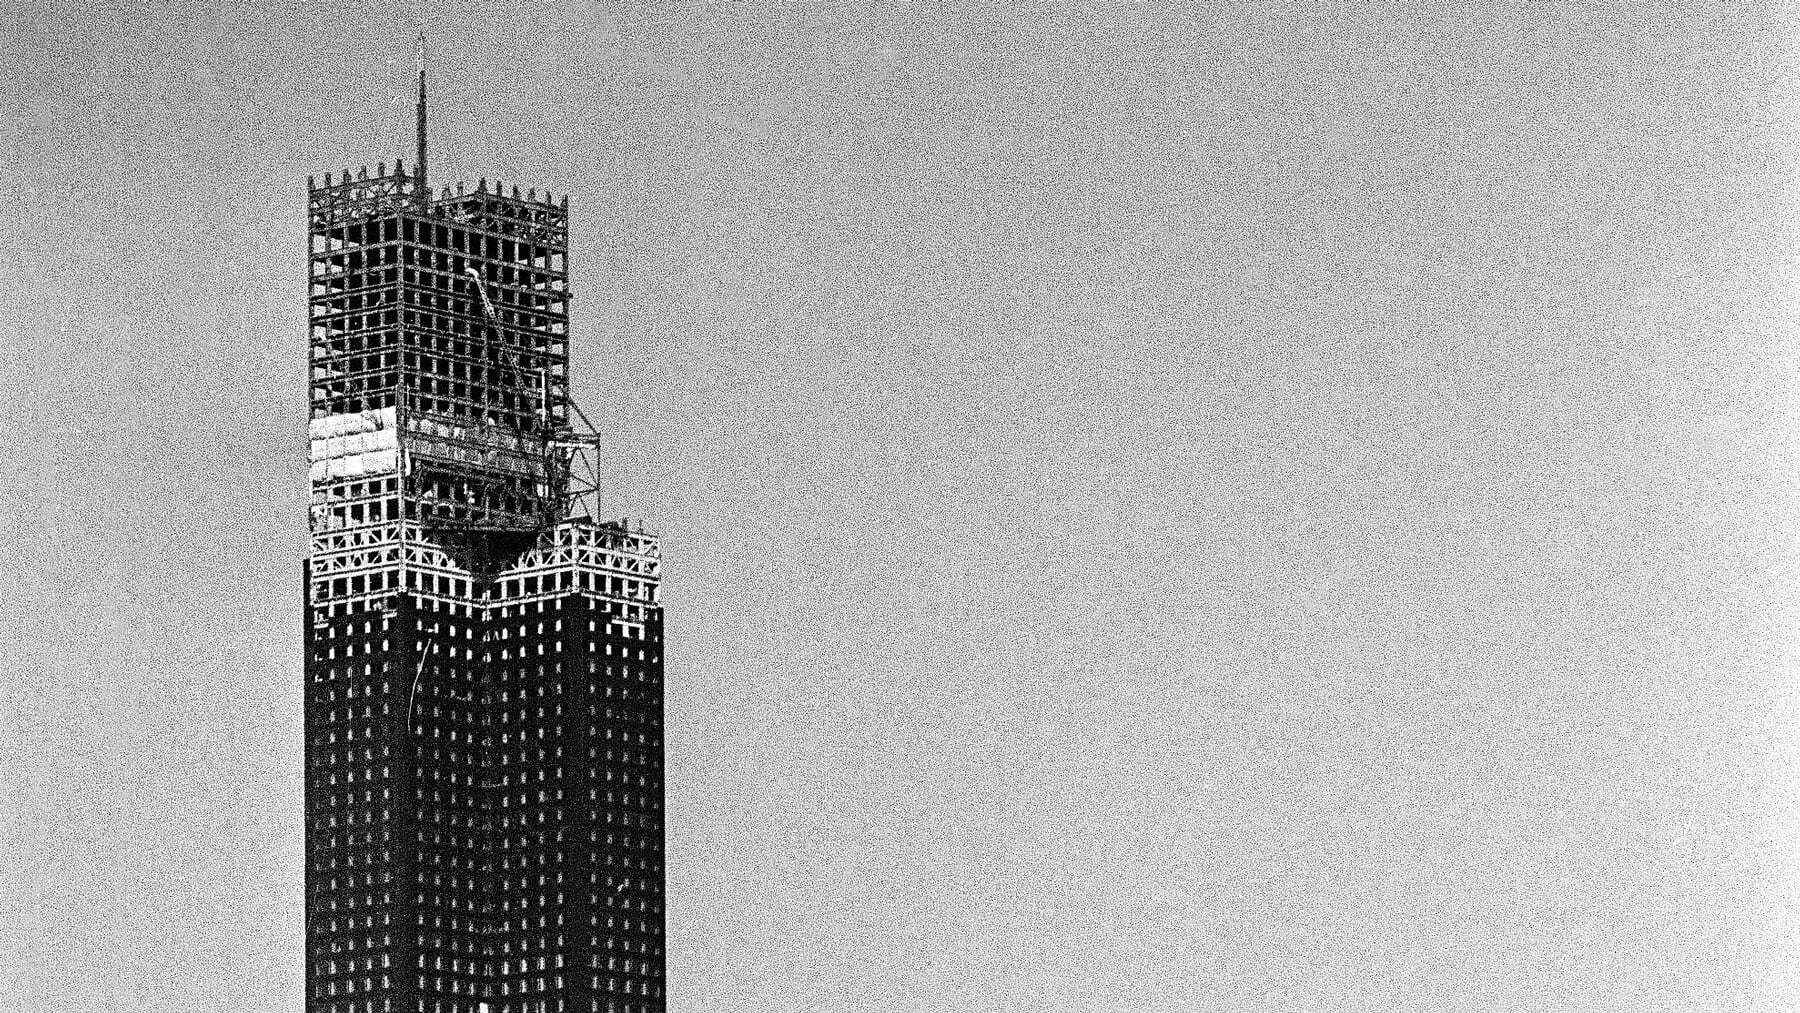 The Sears Tower under construction